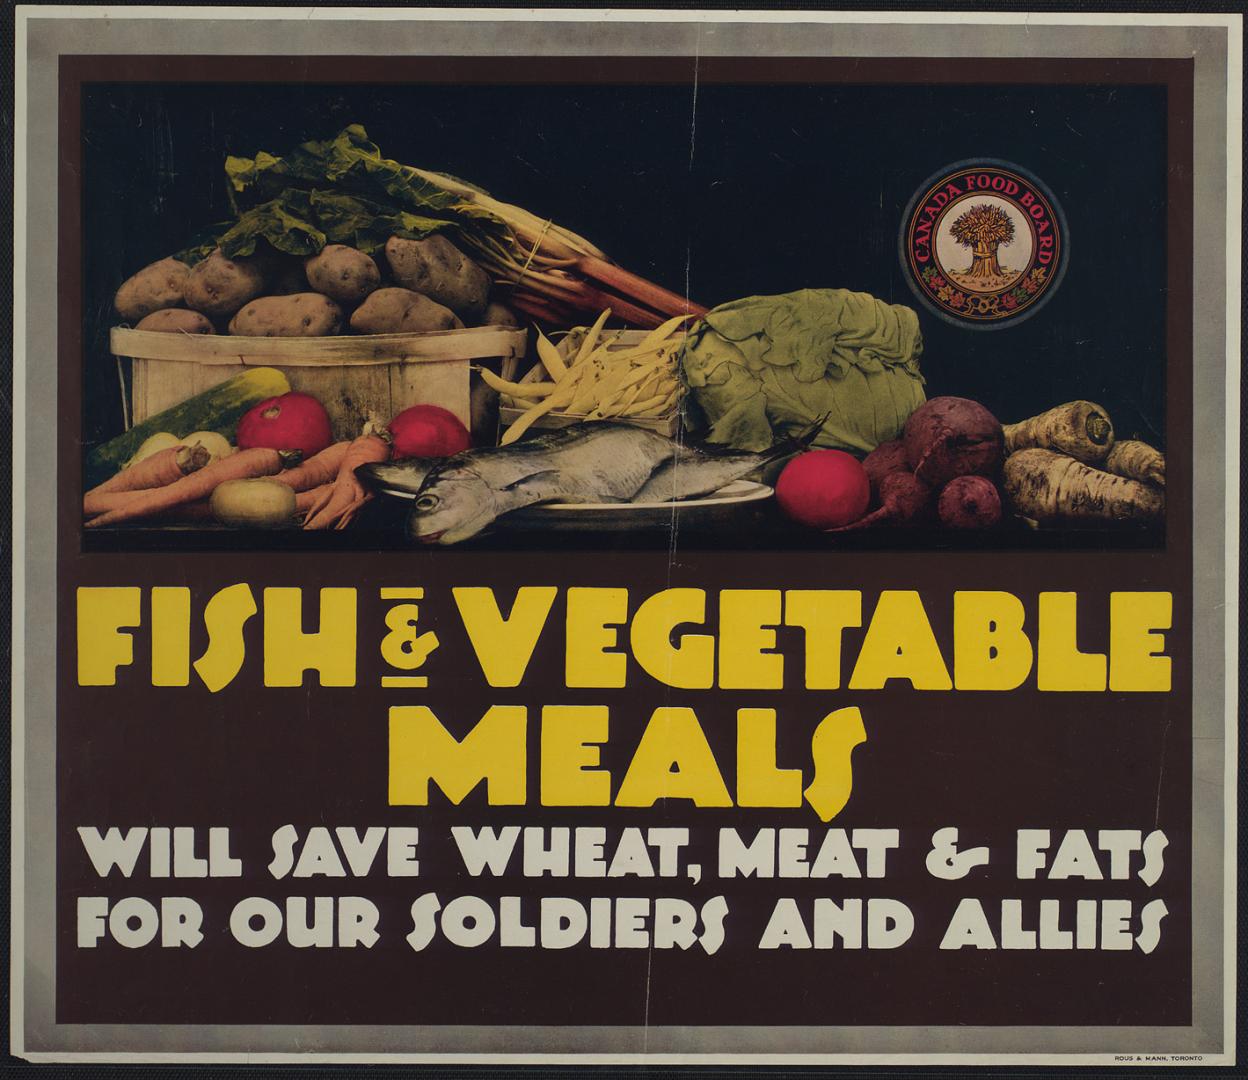 Fish & Vegetable meals will save wheat, meat & fats for our soldiers and allies